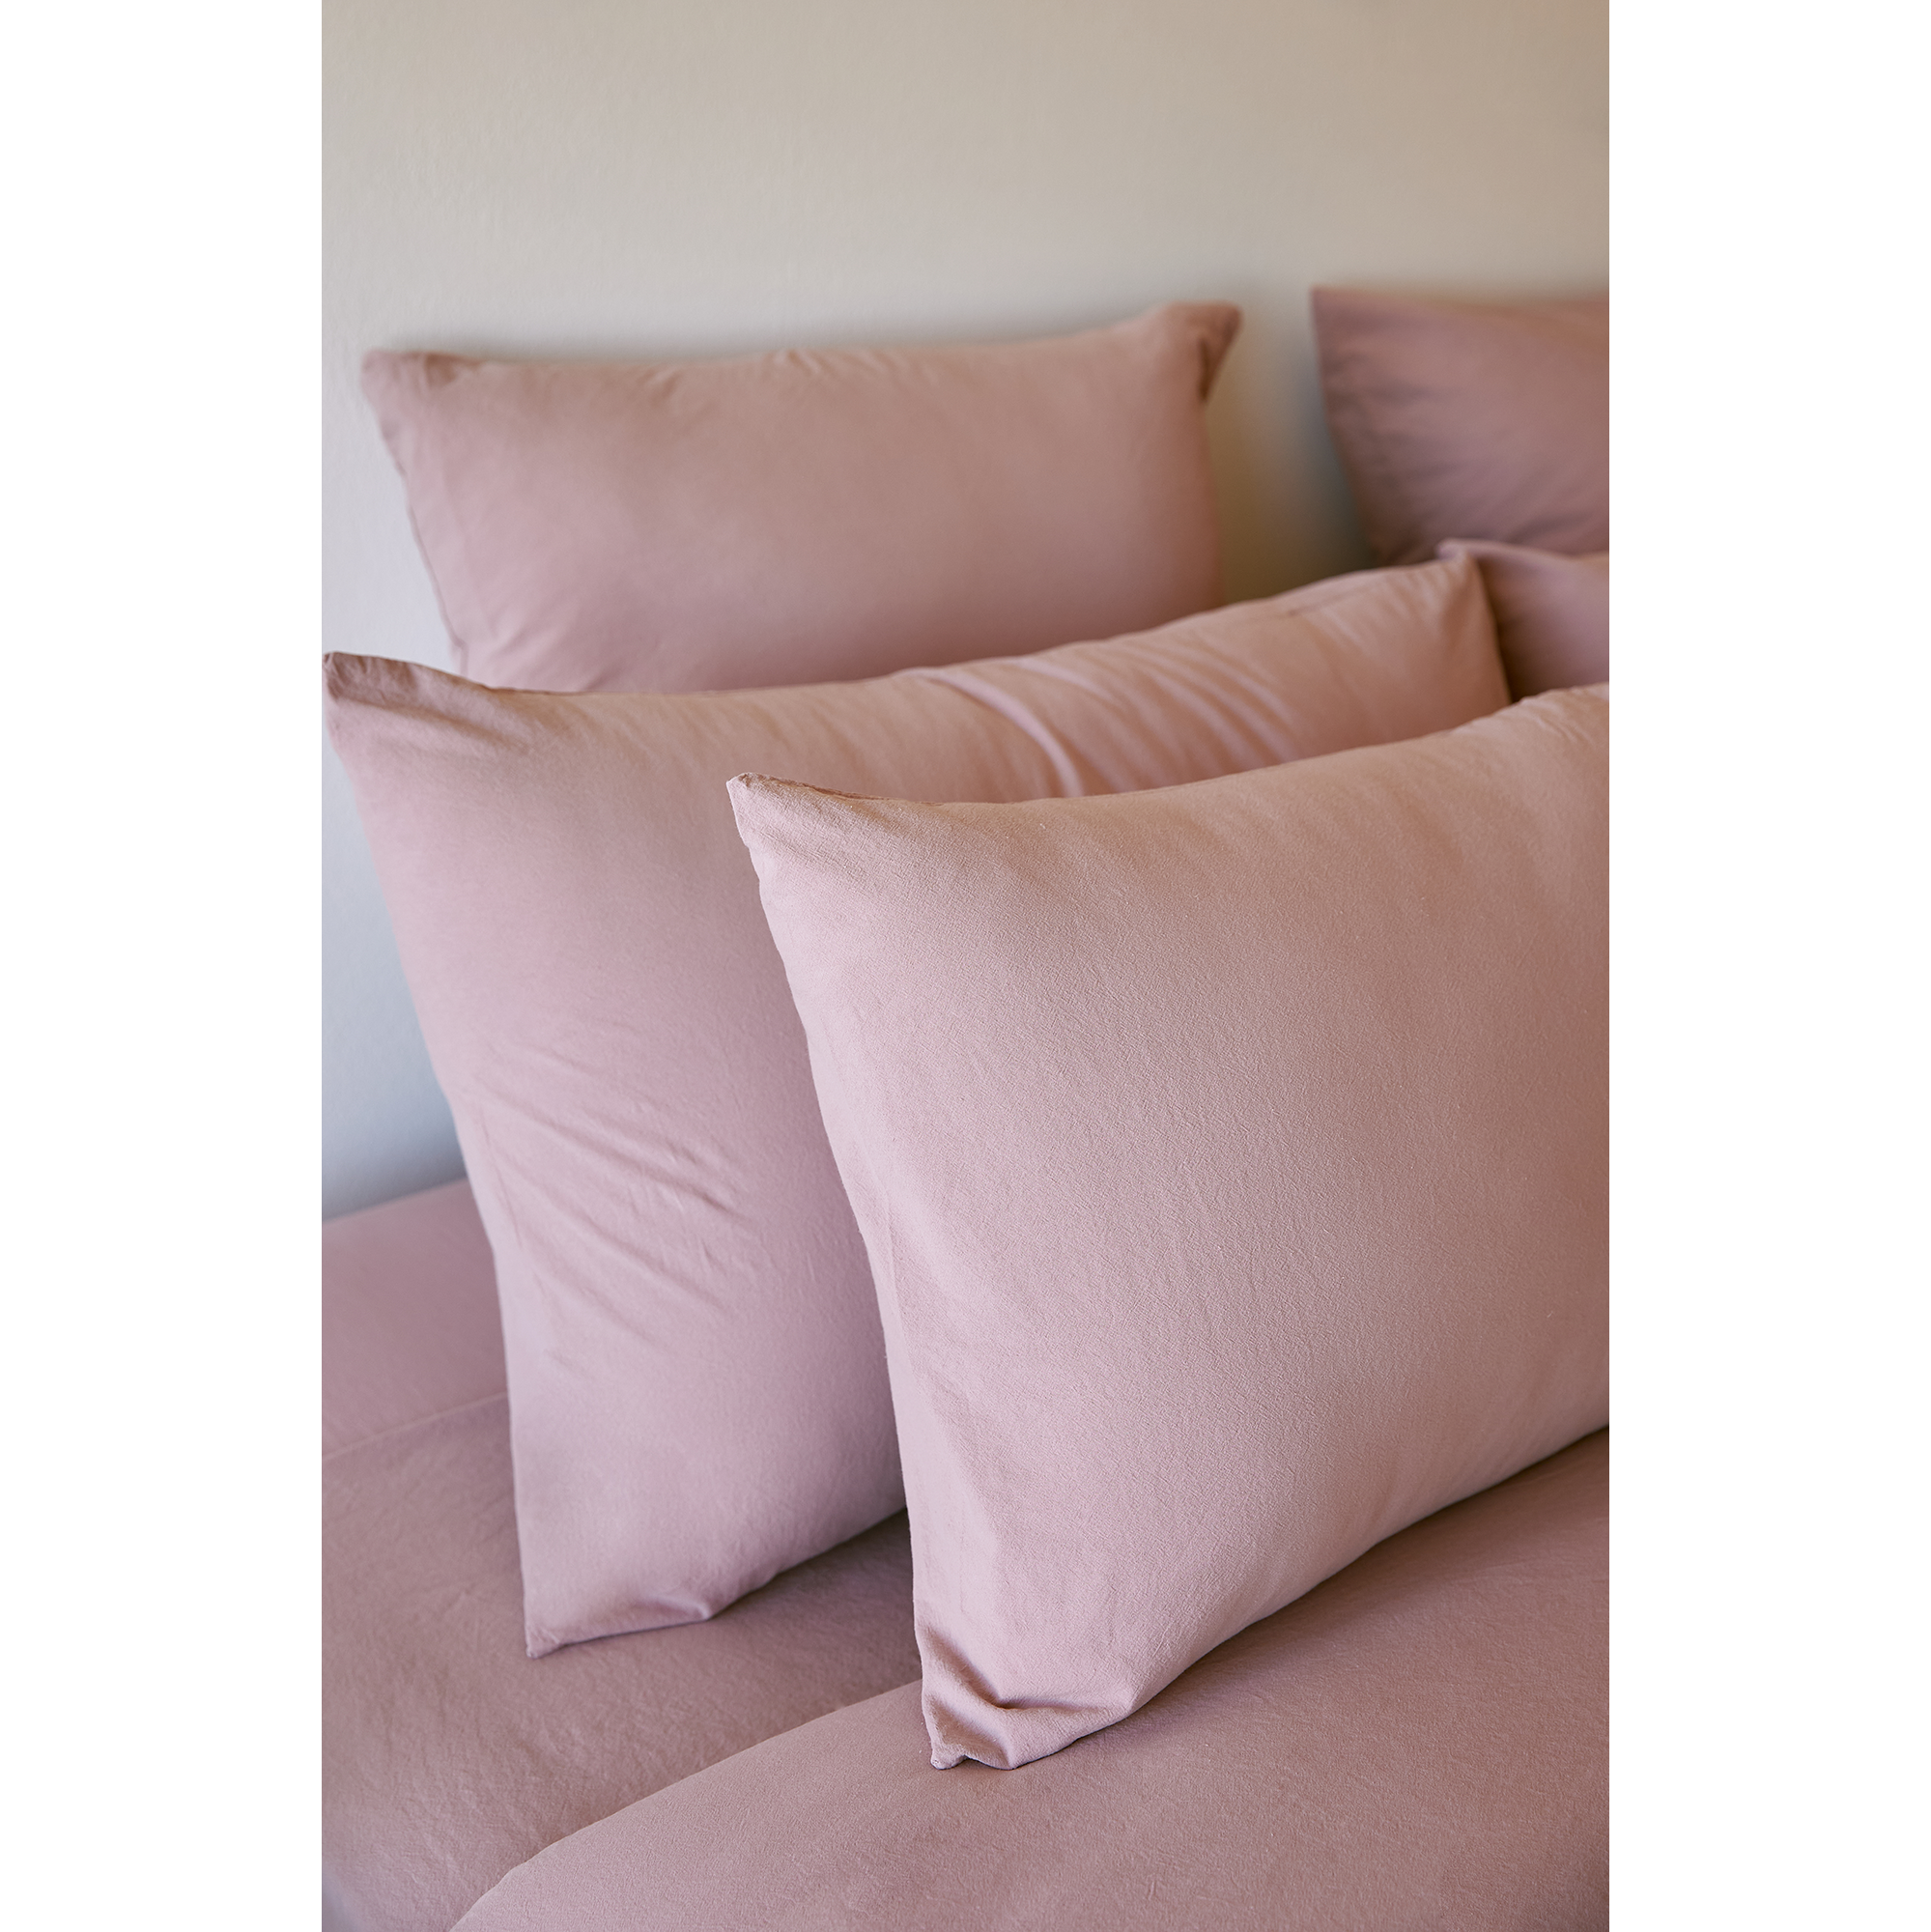 Torres Novas 1845 Duvet cover Old Pink - Lits Jumeaux - 240 x 220 cm (without pillowcases) - Washed Cotton